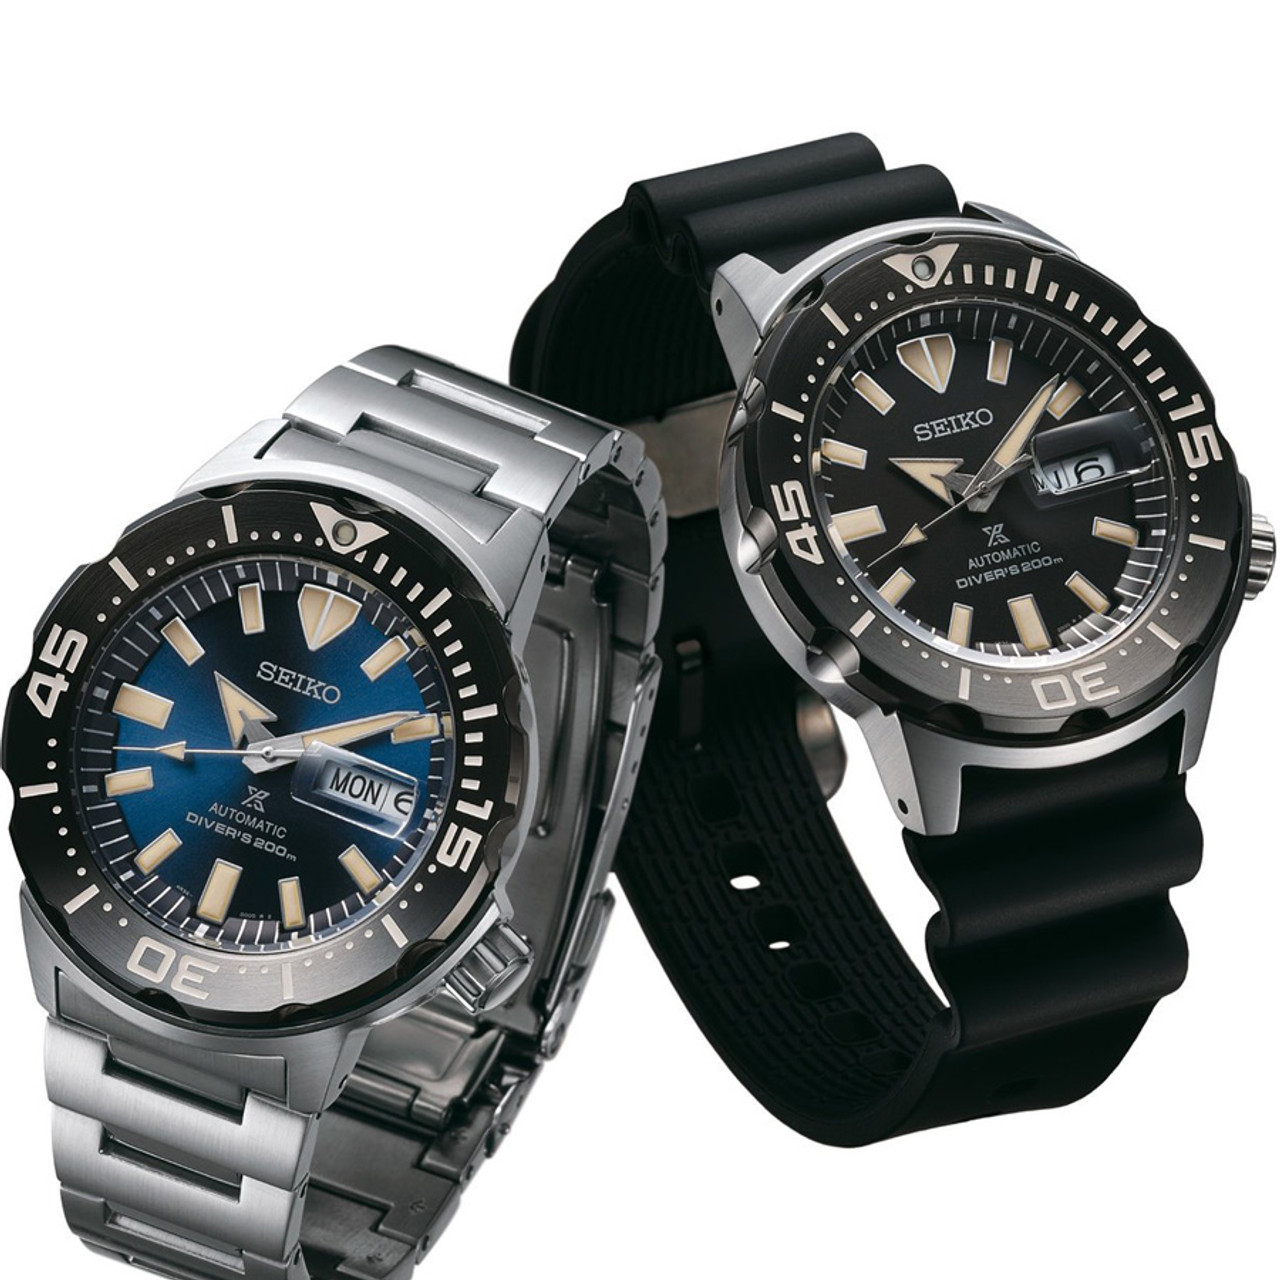 Seiko Prospex Monster Automatic Diver's Watch SRPD25K1